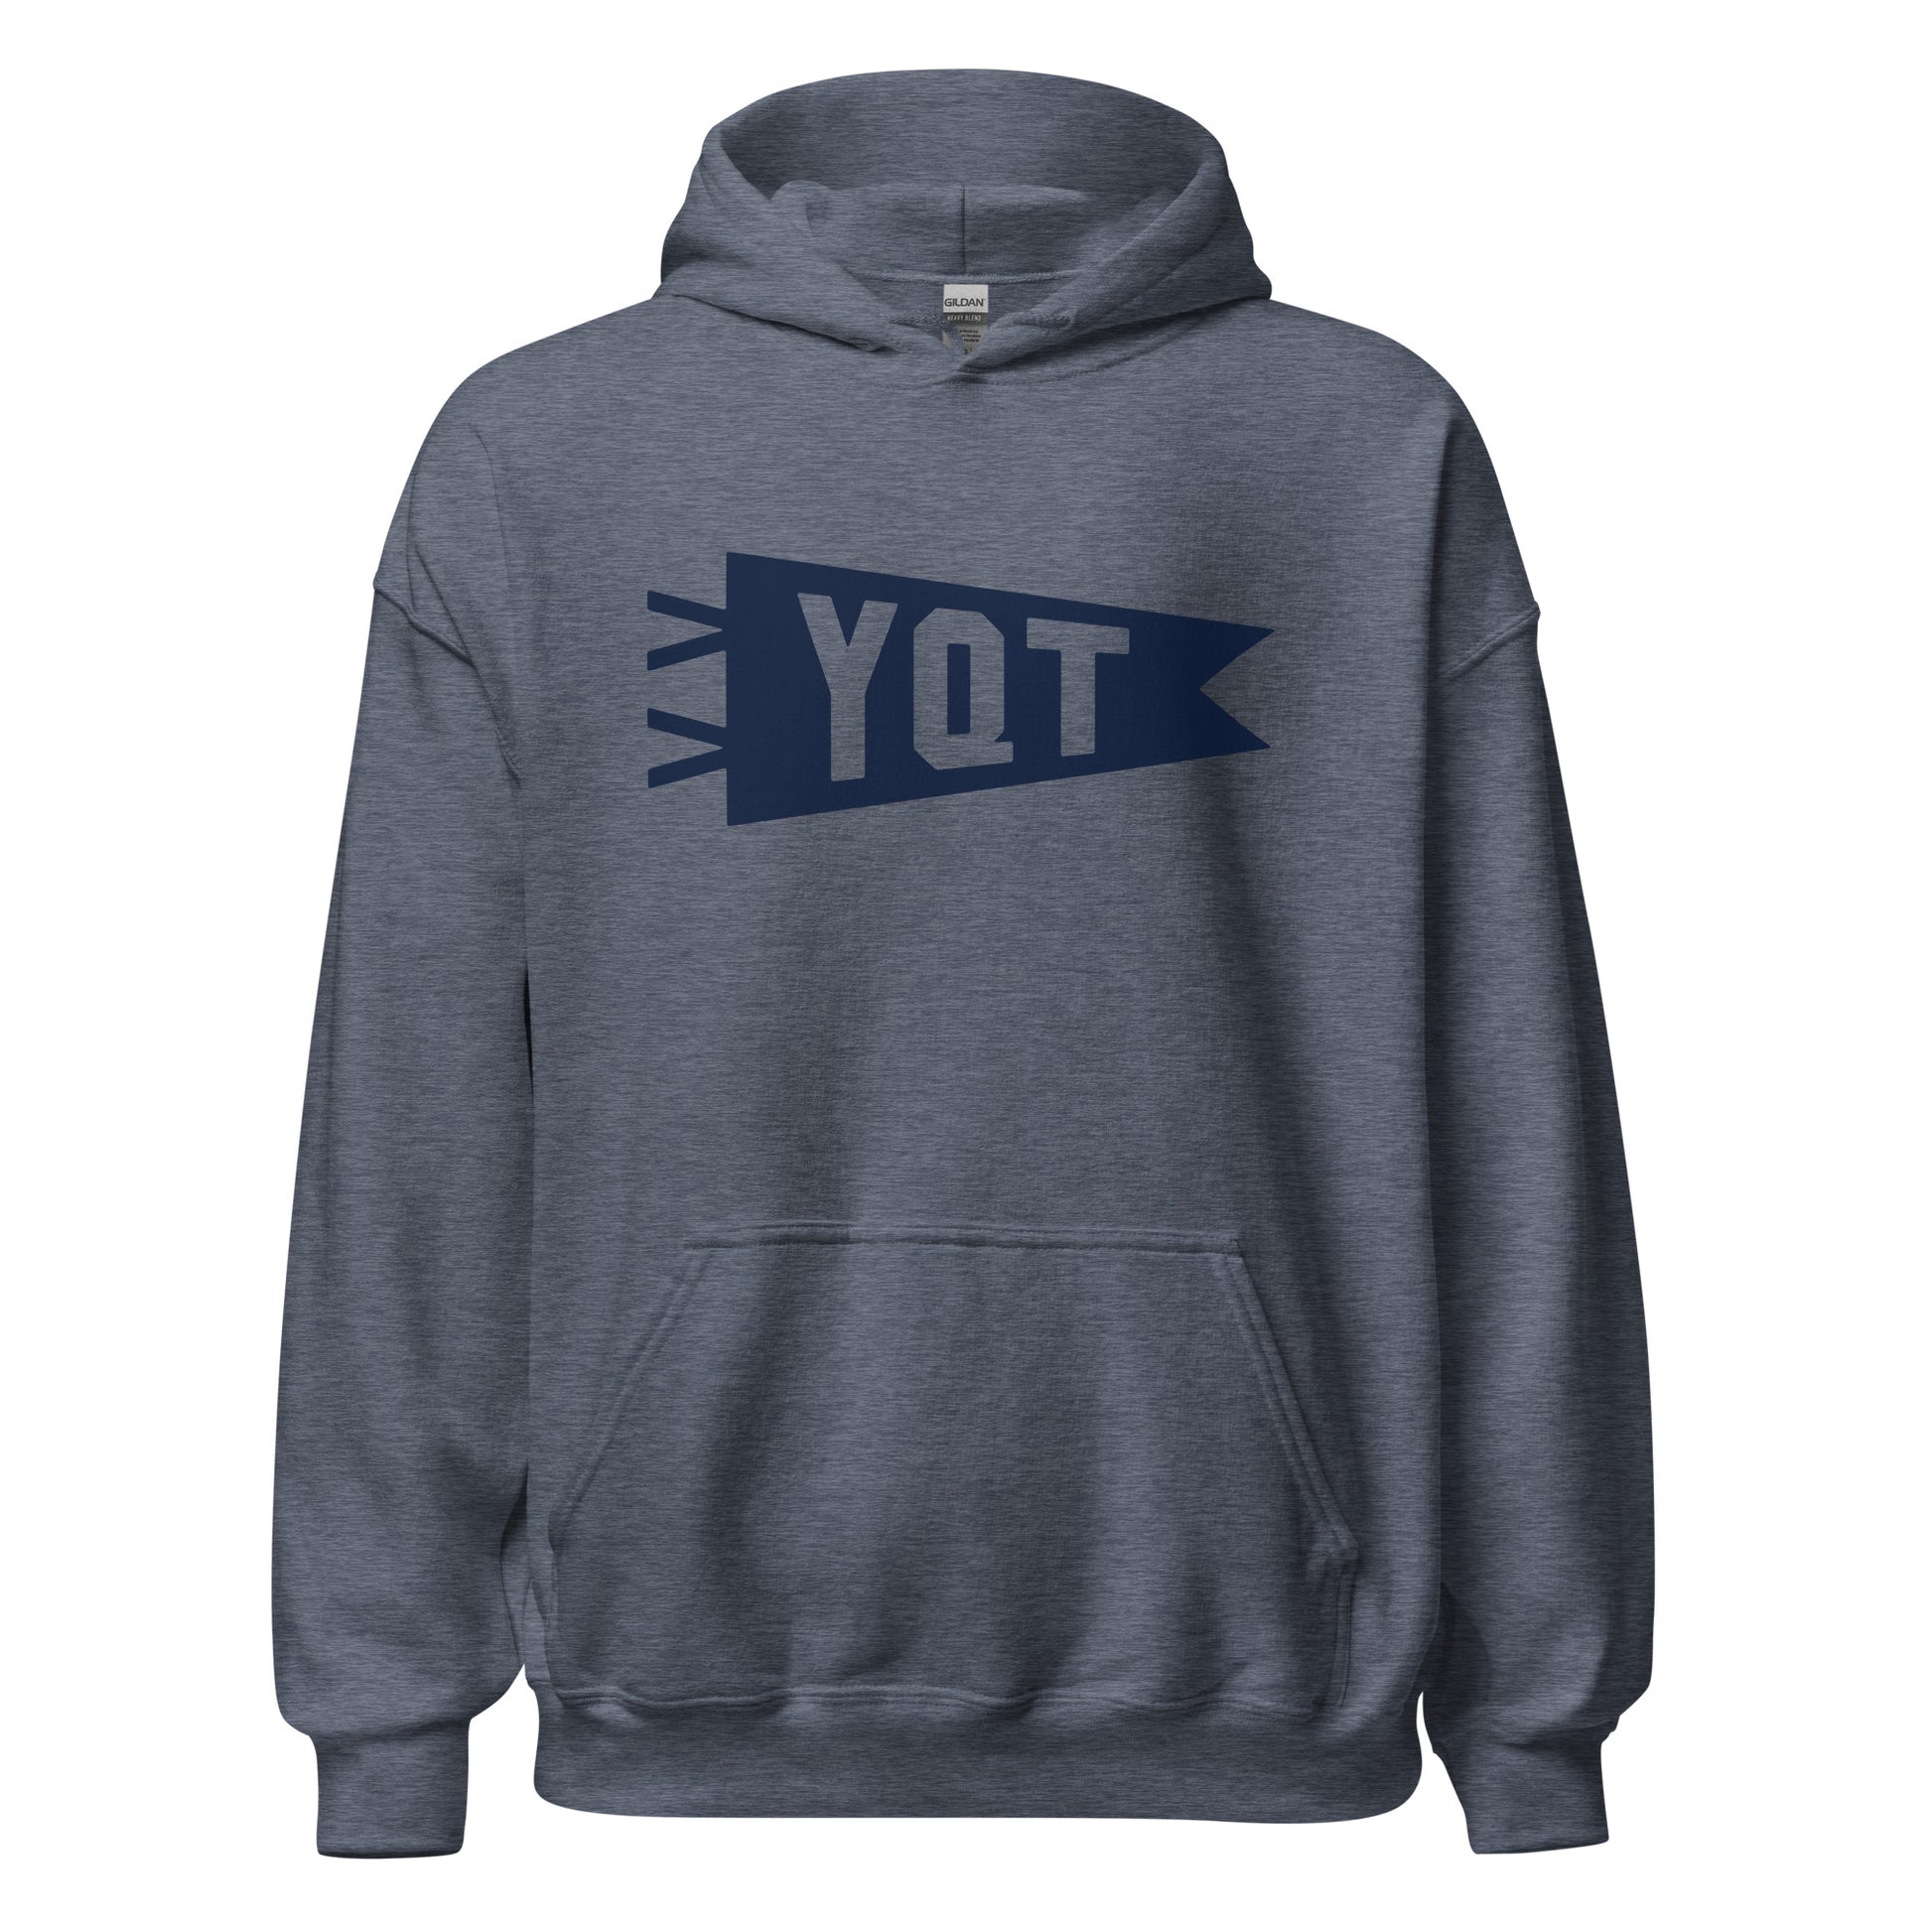 Airport Code Unisex Hoodie - Navy Blue Graphic • YQT Thunder Bay • YHM Designs - Image 05